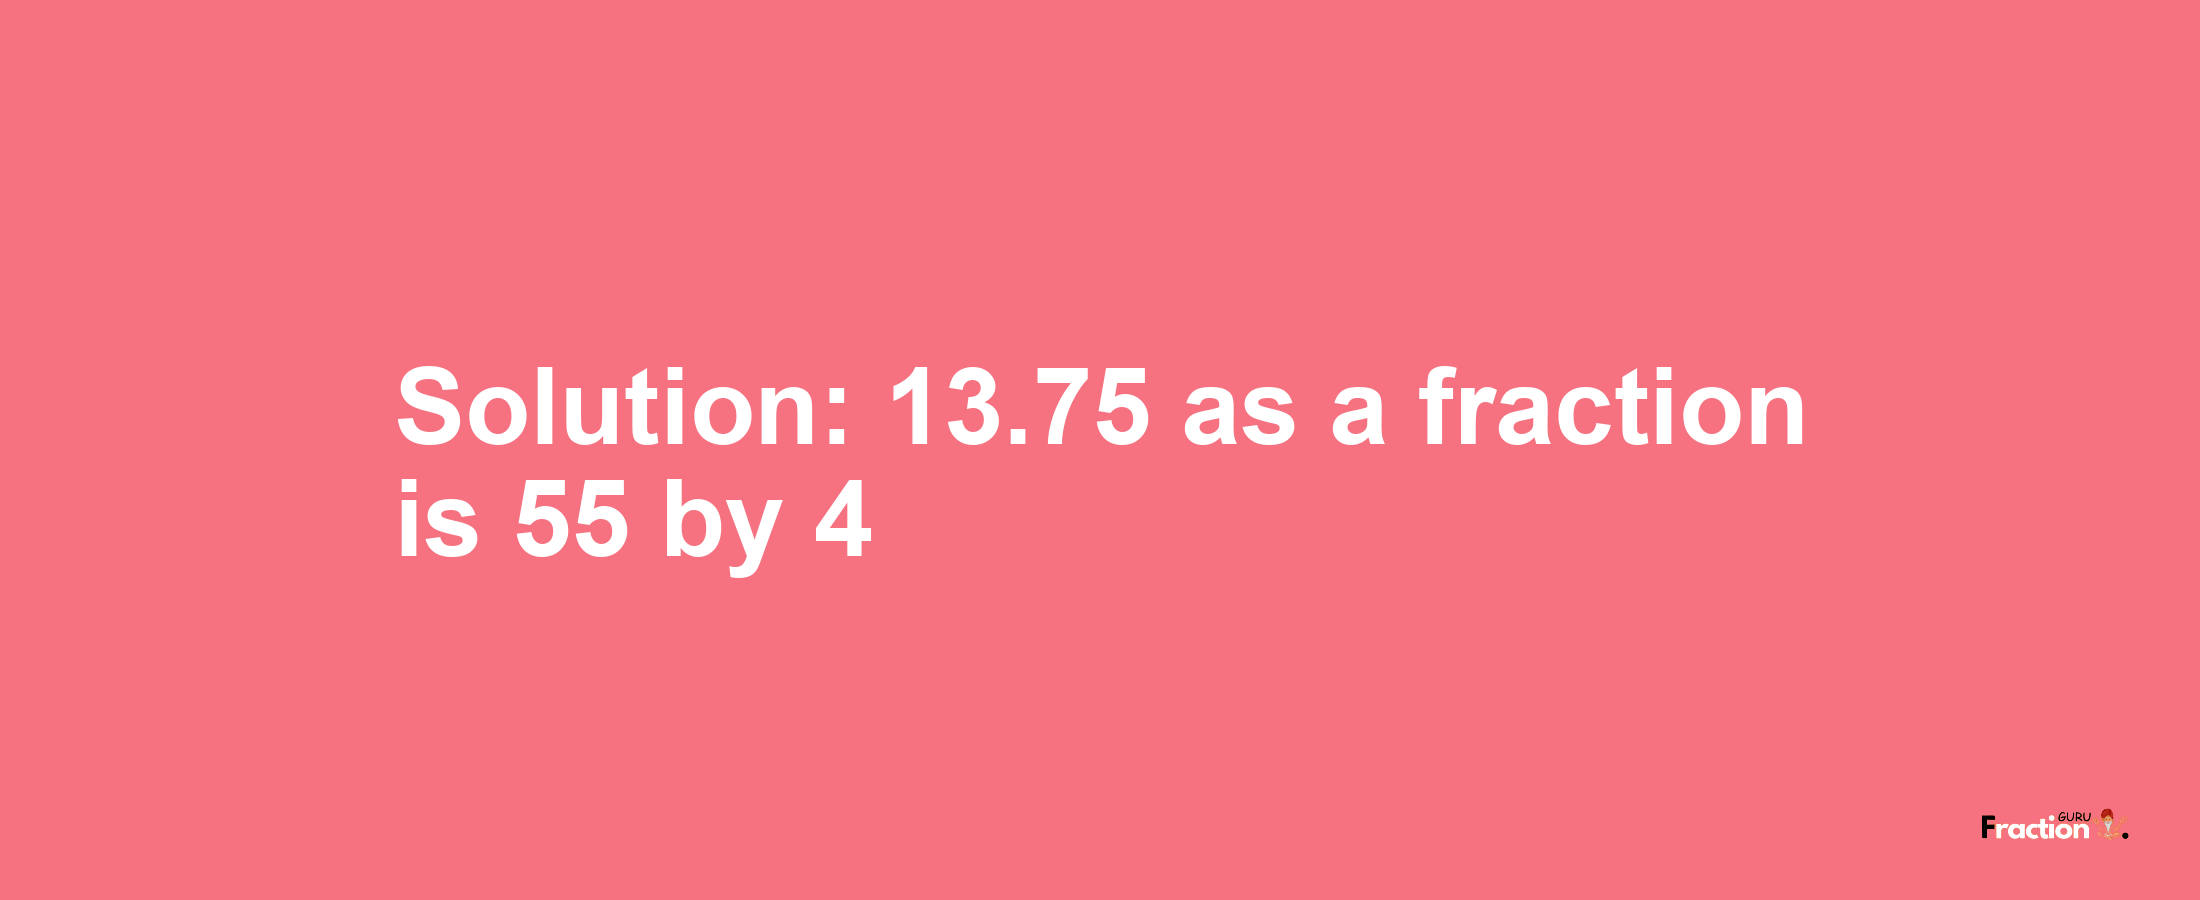 Solution:13.75 as a fraction is 55/4